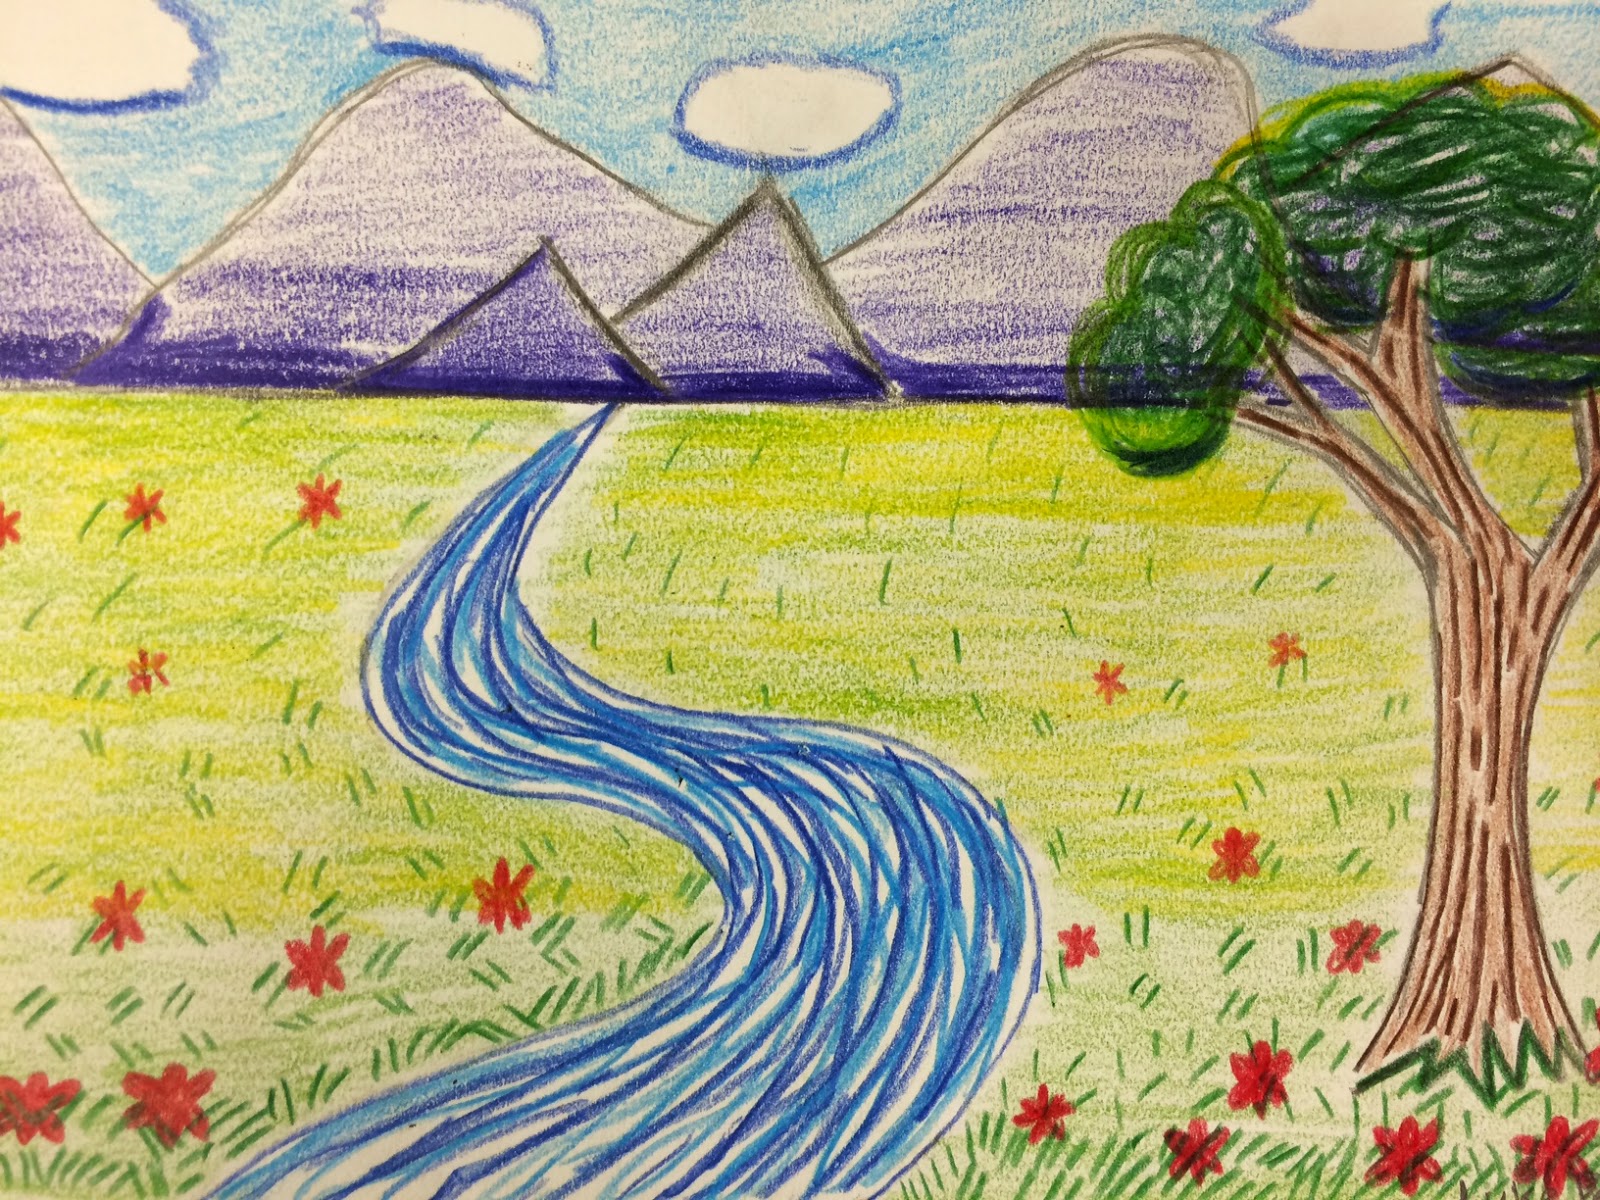 Mrs. Wille's Art Room: Step-by-step Landscape Drawings